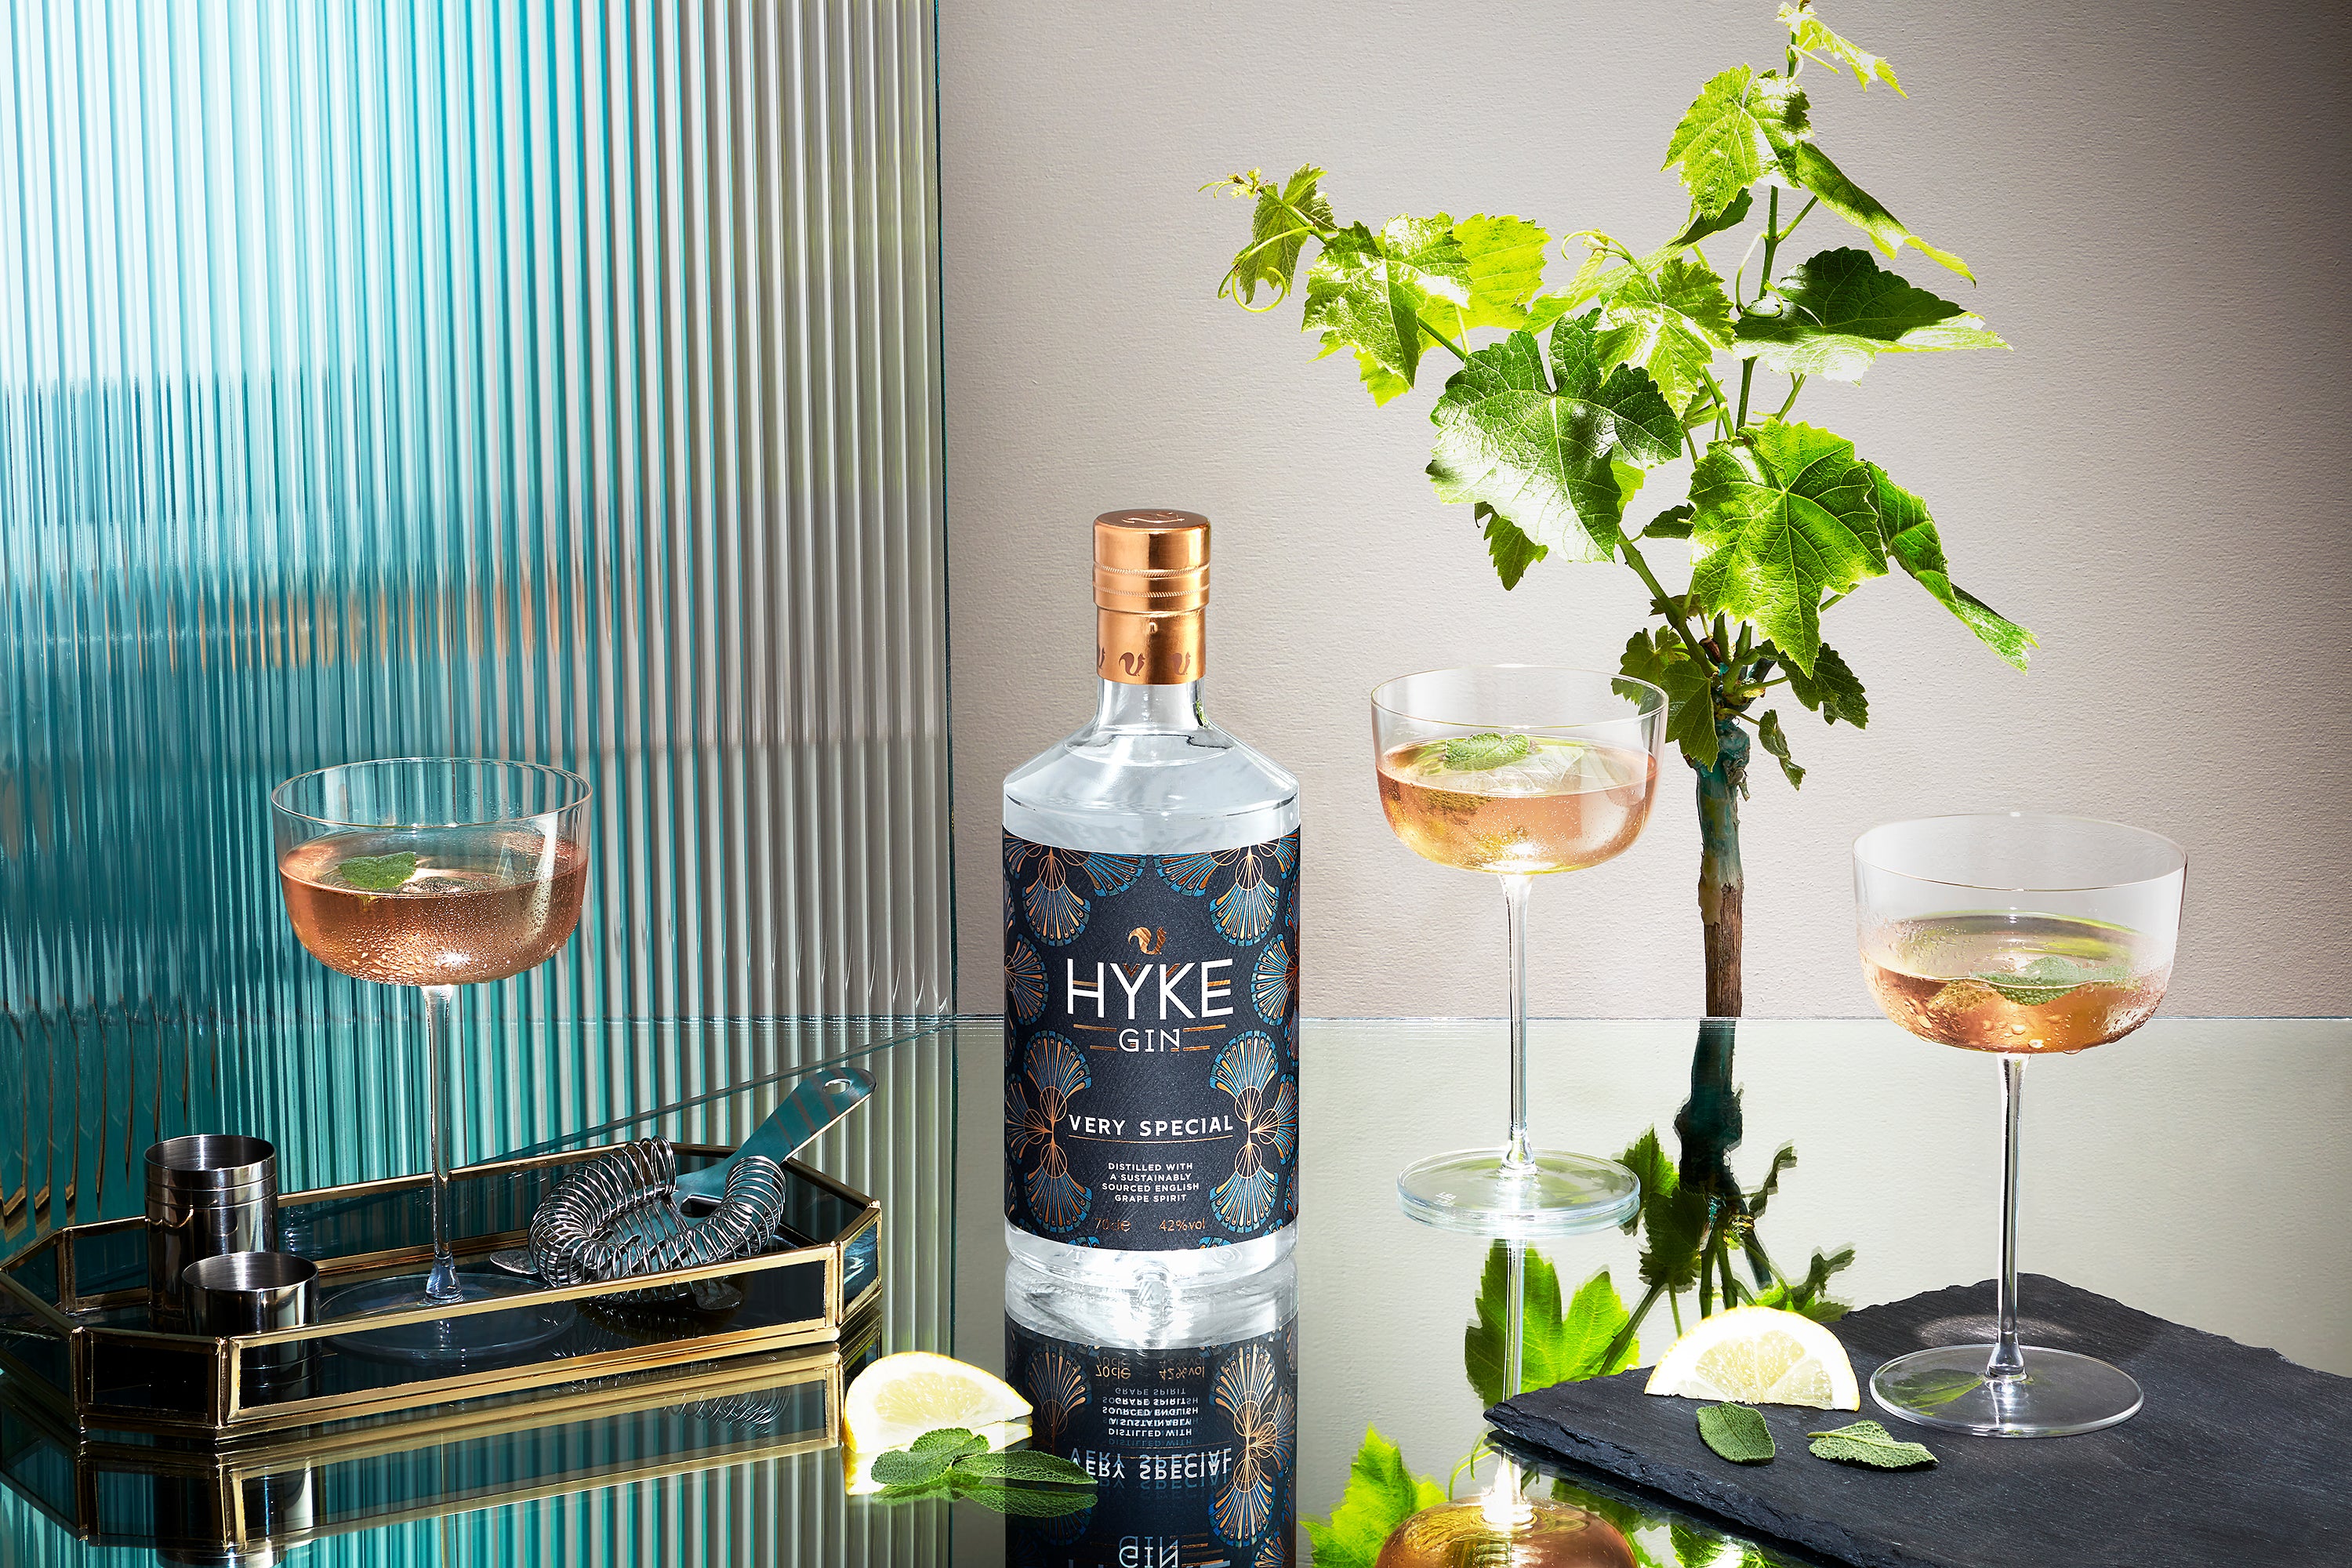 Discover HYKE Gin Very Special this World Gin Day! 